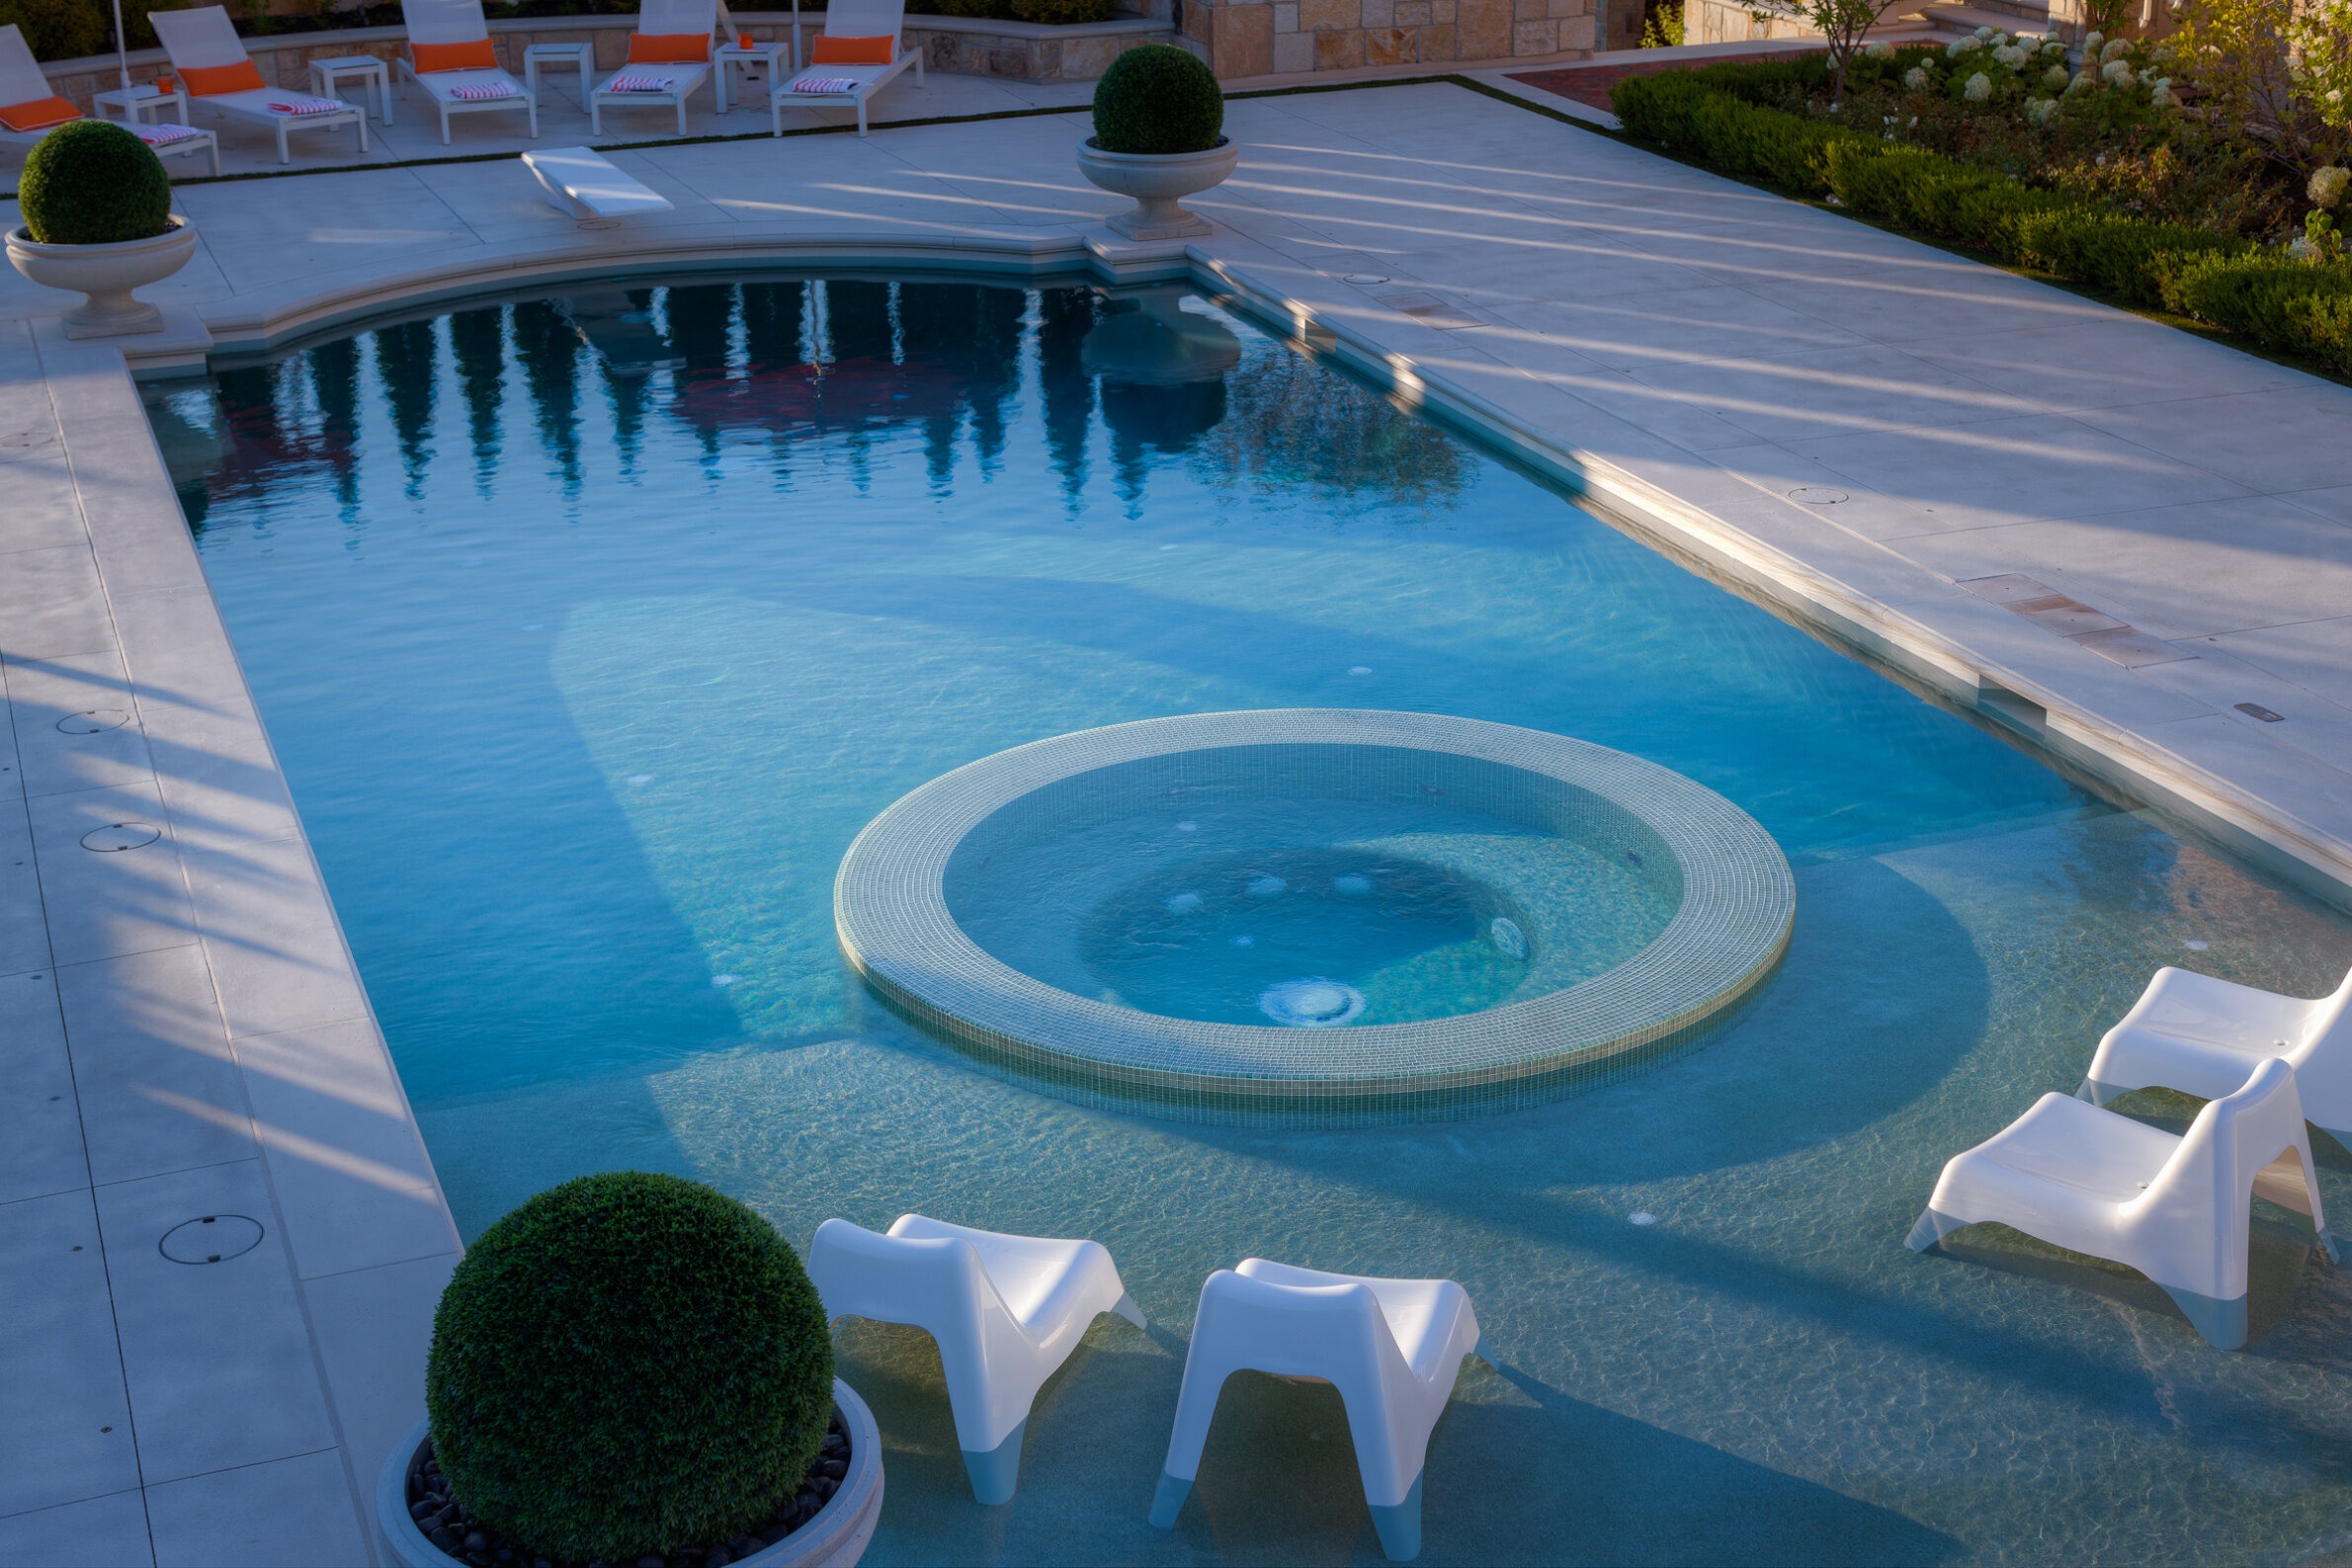 A tranquil swimming pool with a built-in jacuzzi, surrounded by lounge chairs and manicured shrubs, reflects a clear blue sky.